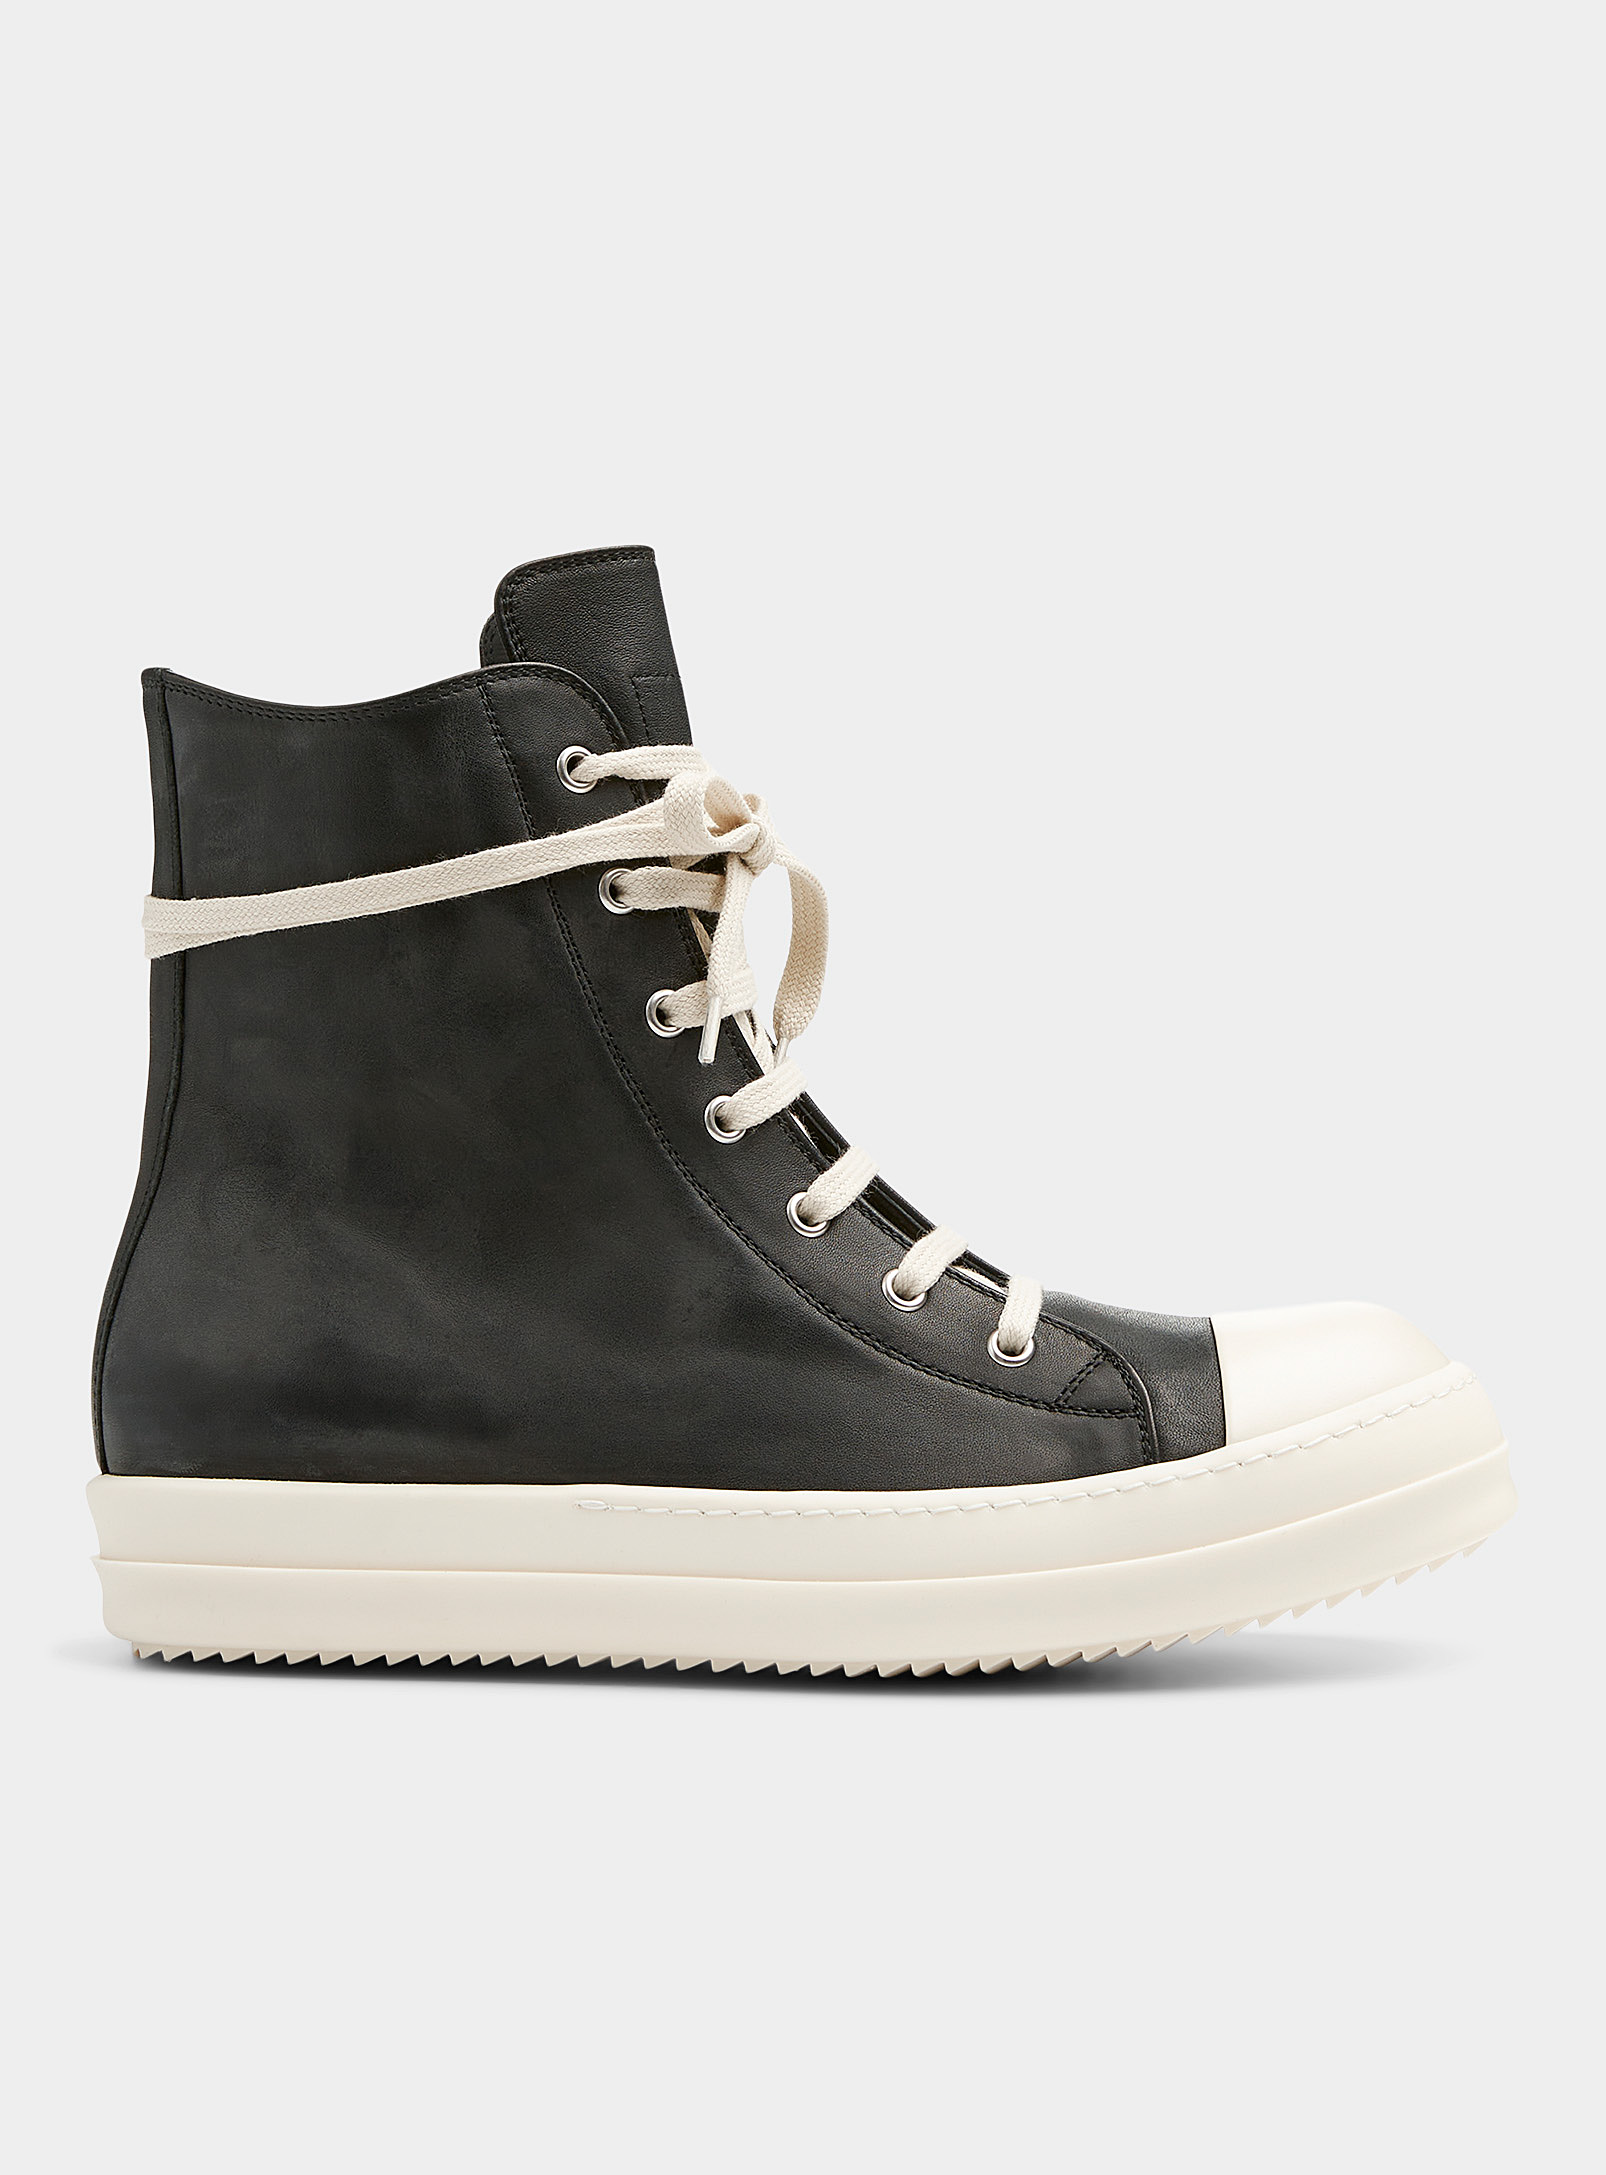 Shop Rick Owens Black And White Leather High-top Sneakers Men